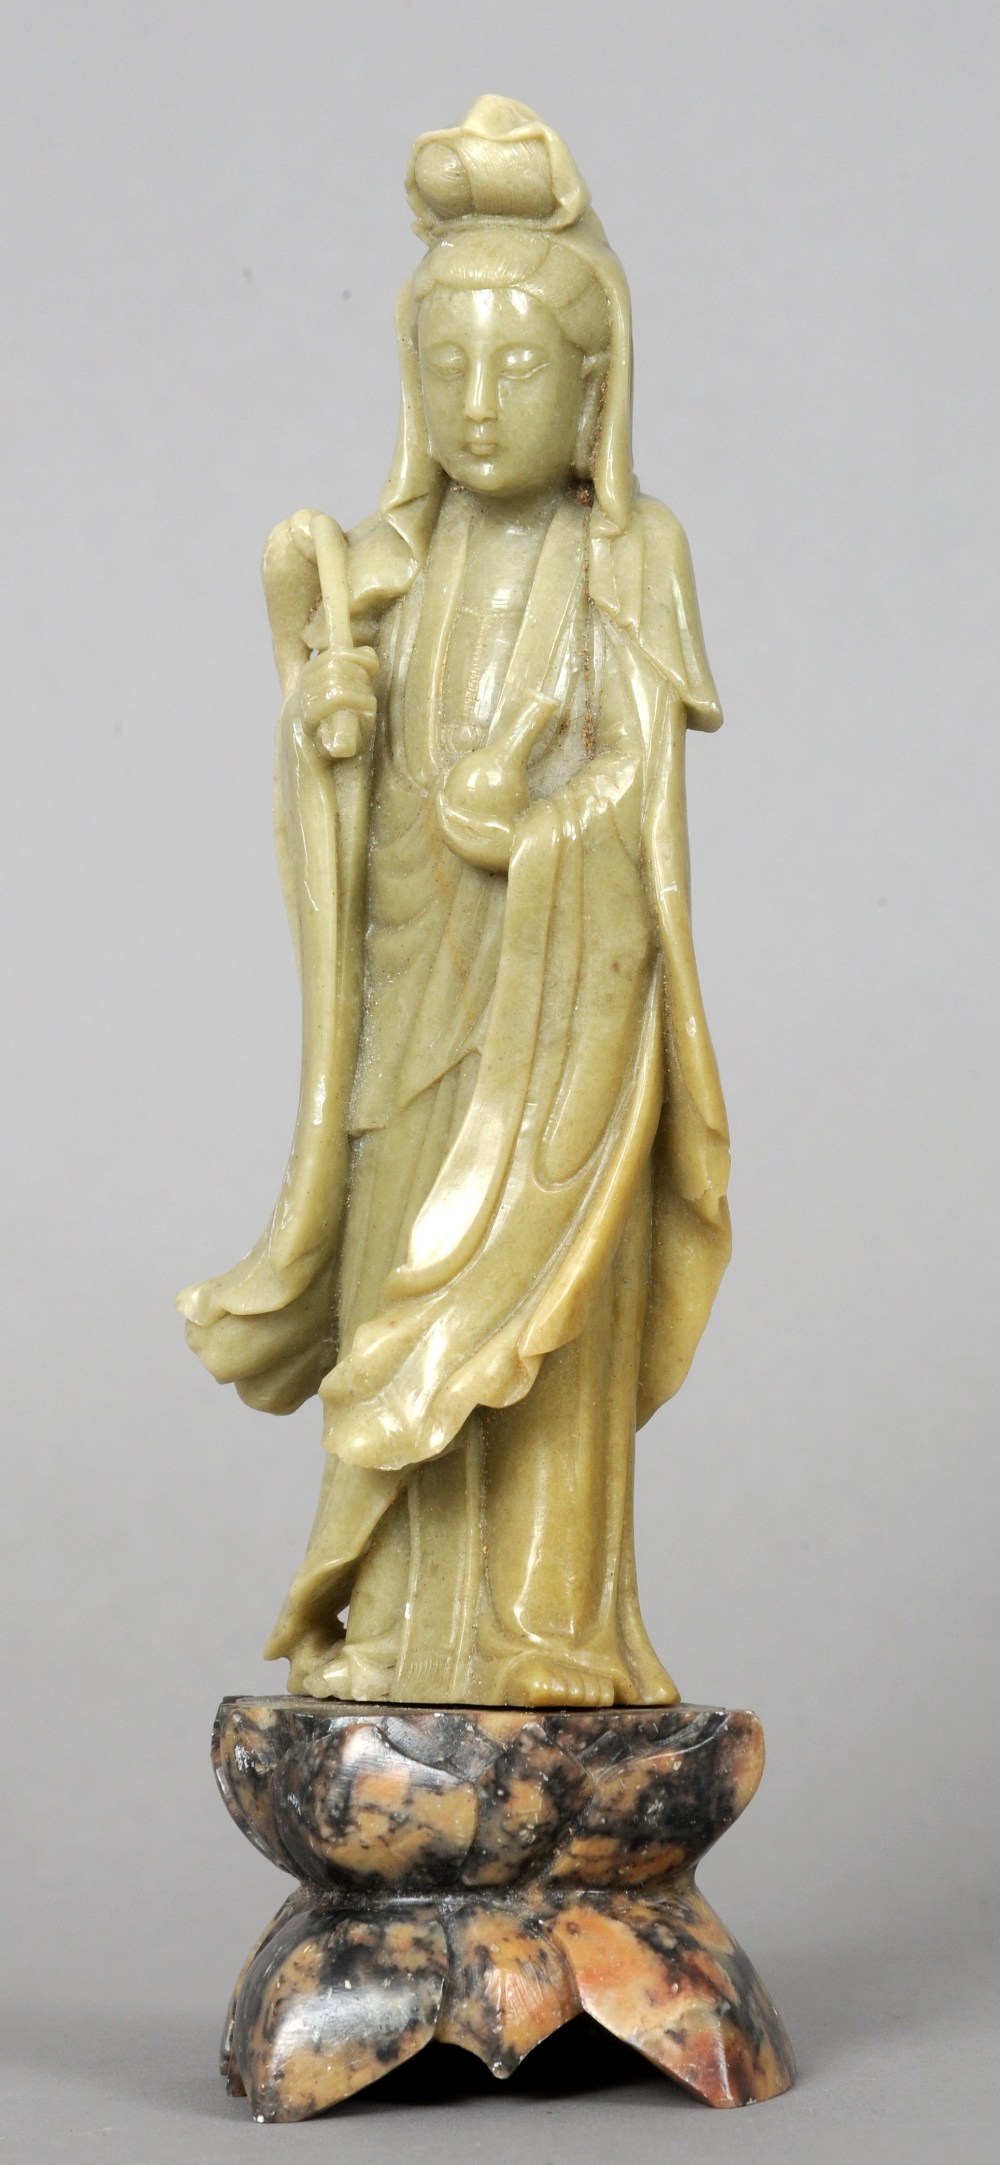 A Chinese carved soapstone figure of Guanyin Modelled holding a bottle and a fly whisk, standing